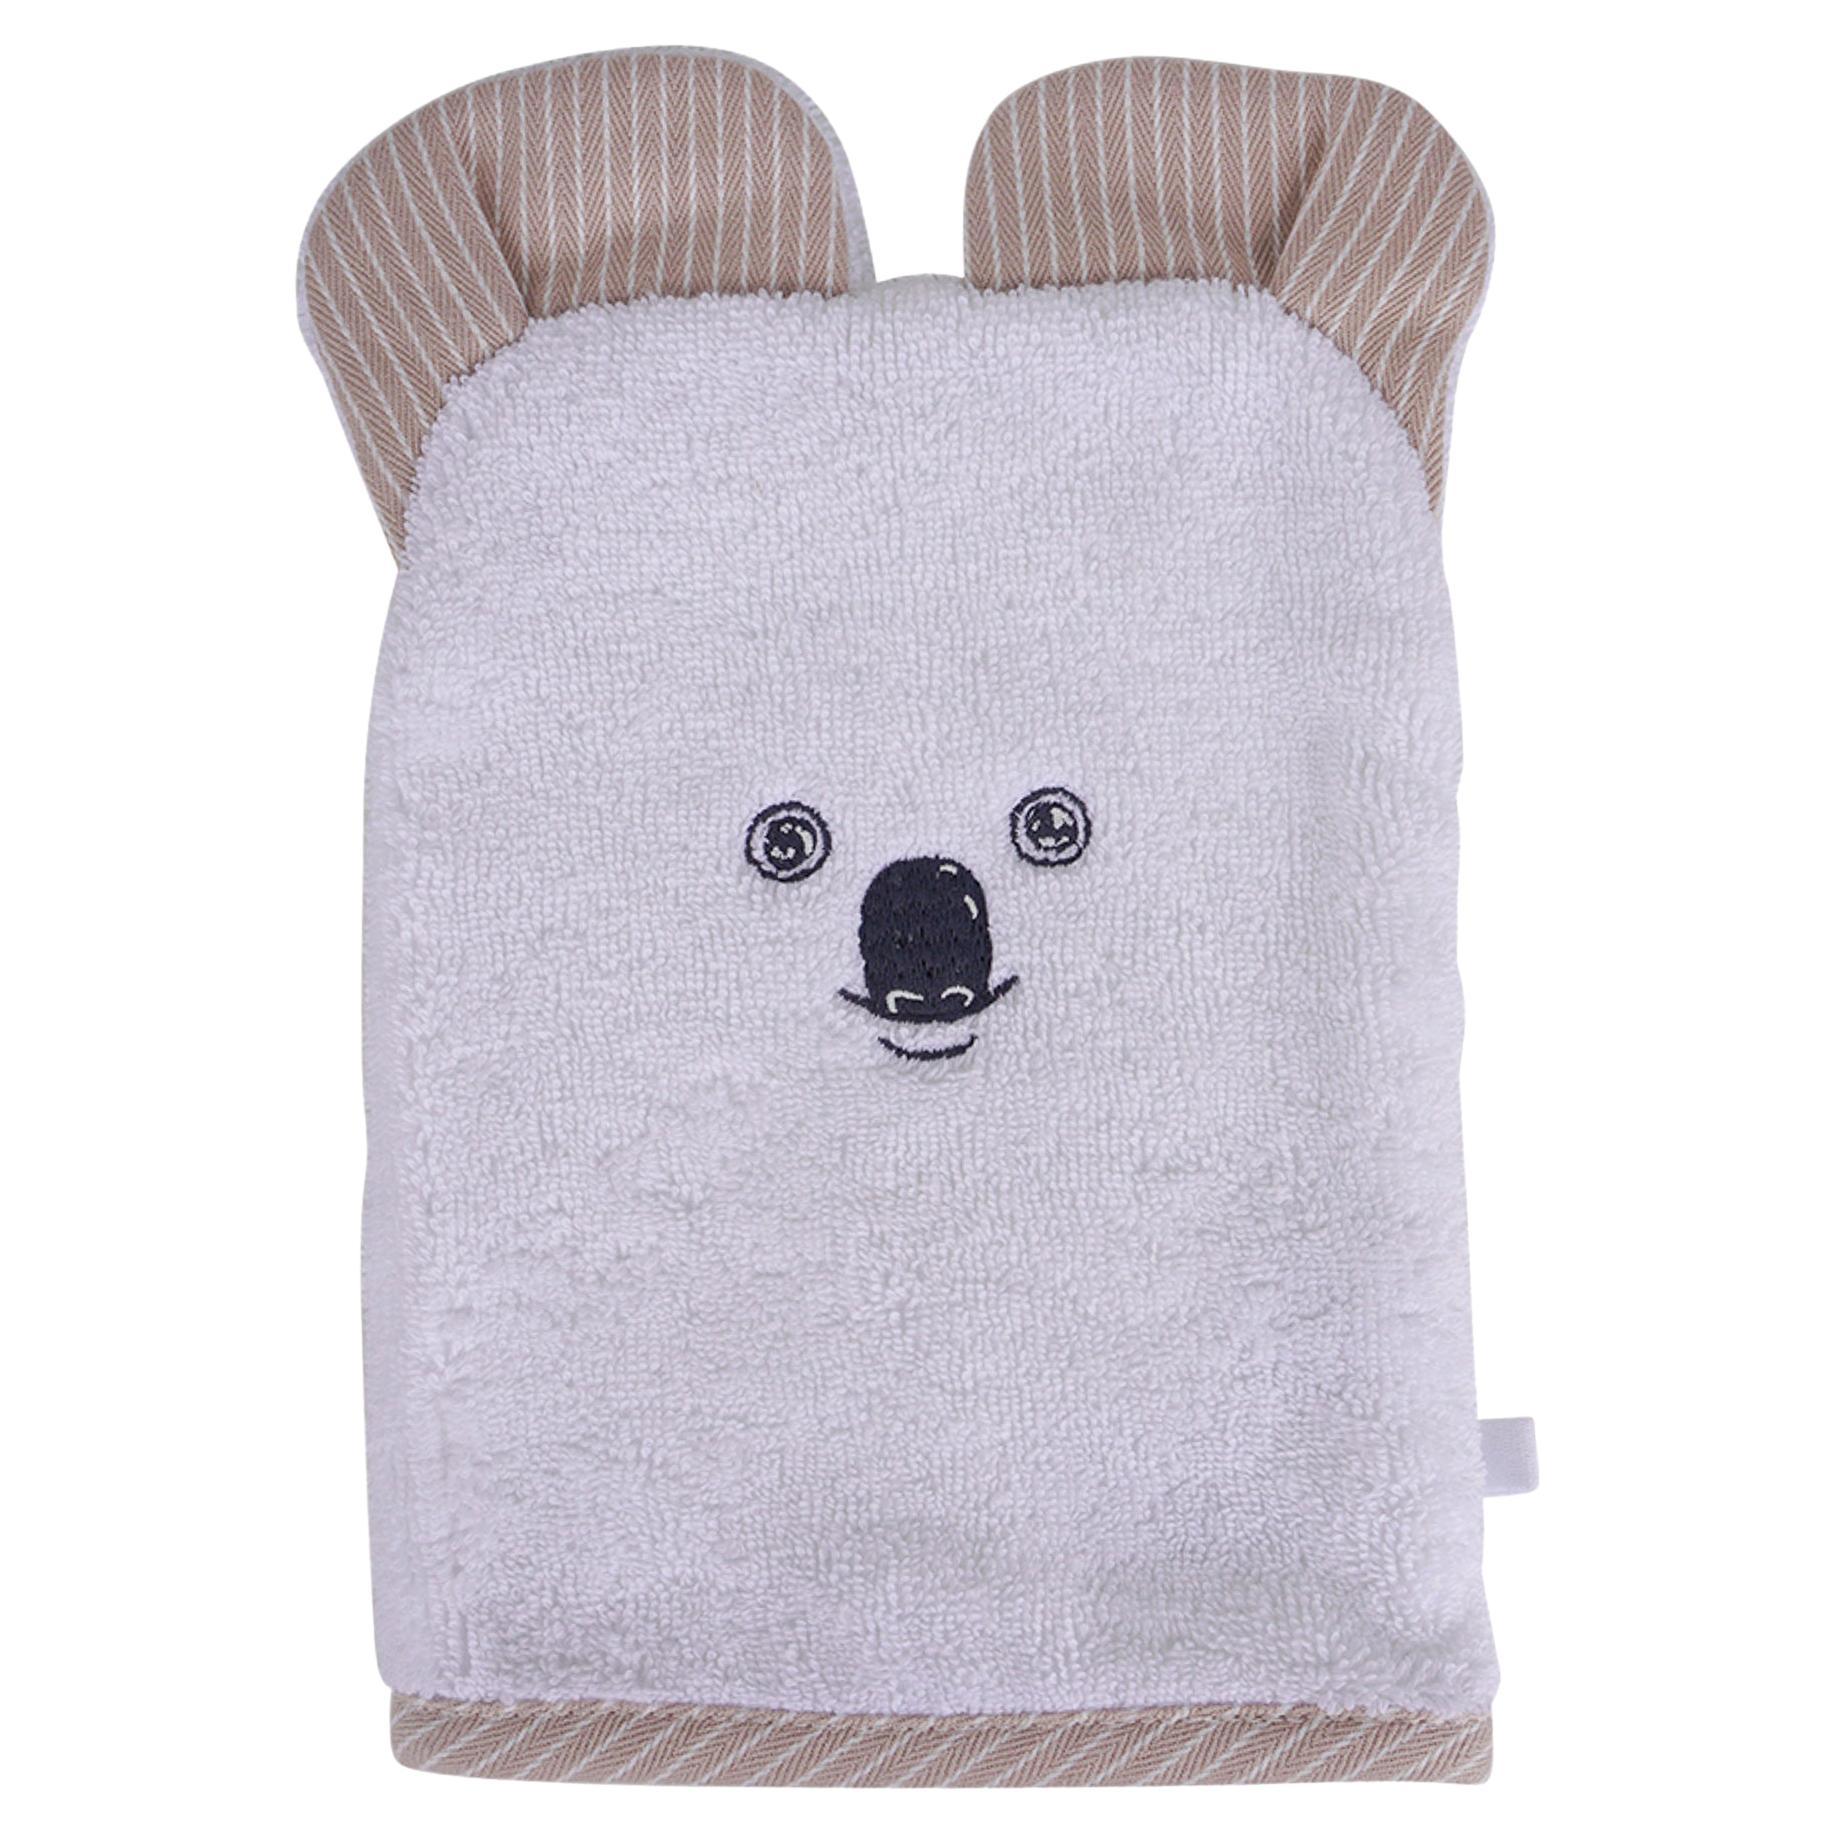 Hermes Passe - Passe Washcloth Embroidered Koala Cotton For Baby